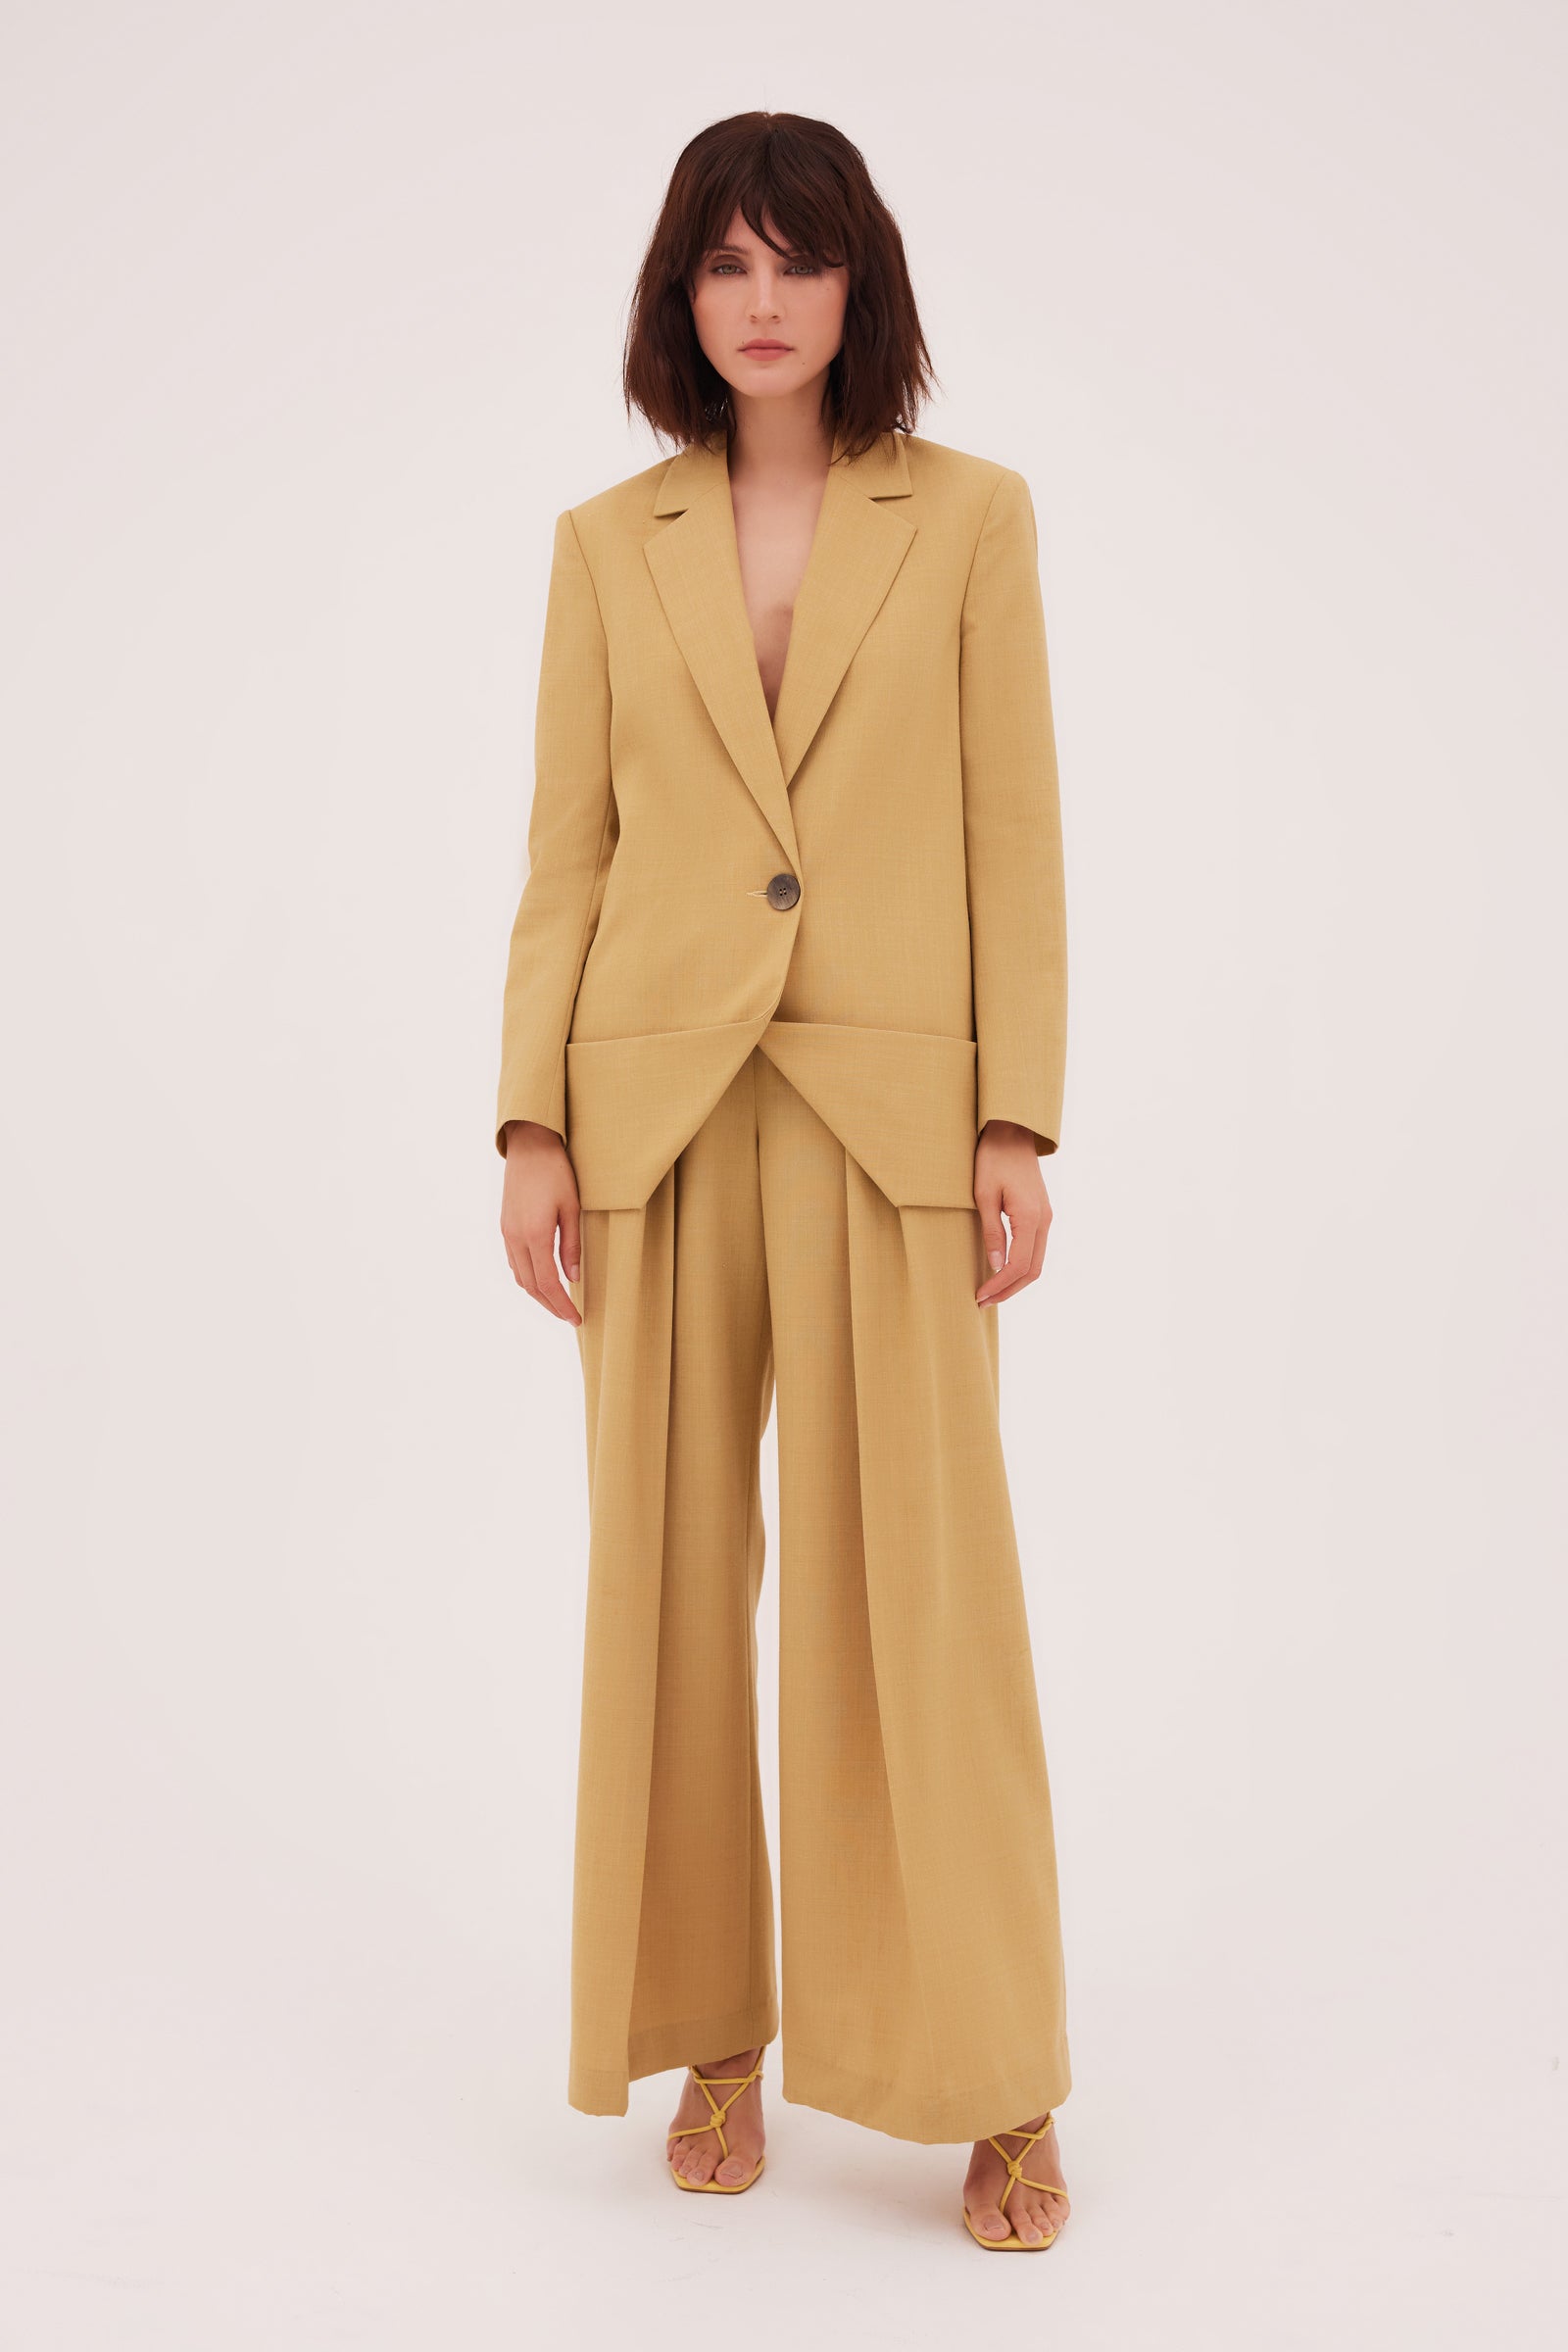 CLAY SUITING PROCESSION PANT